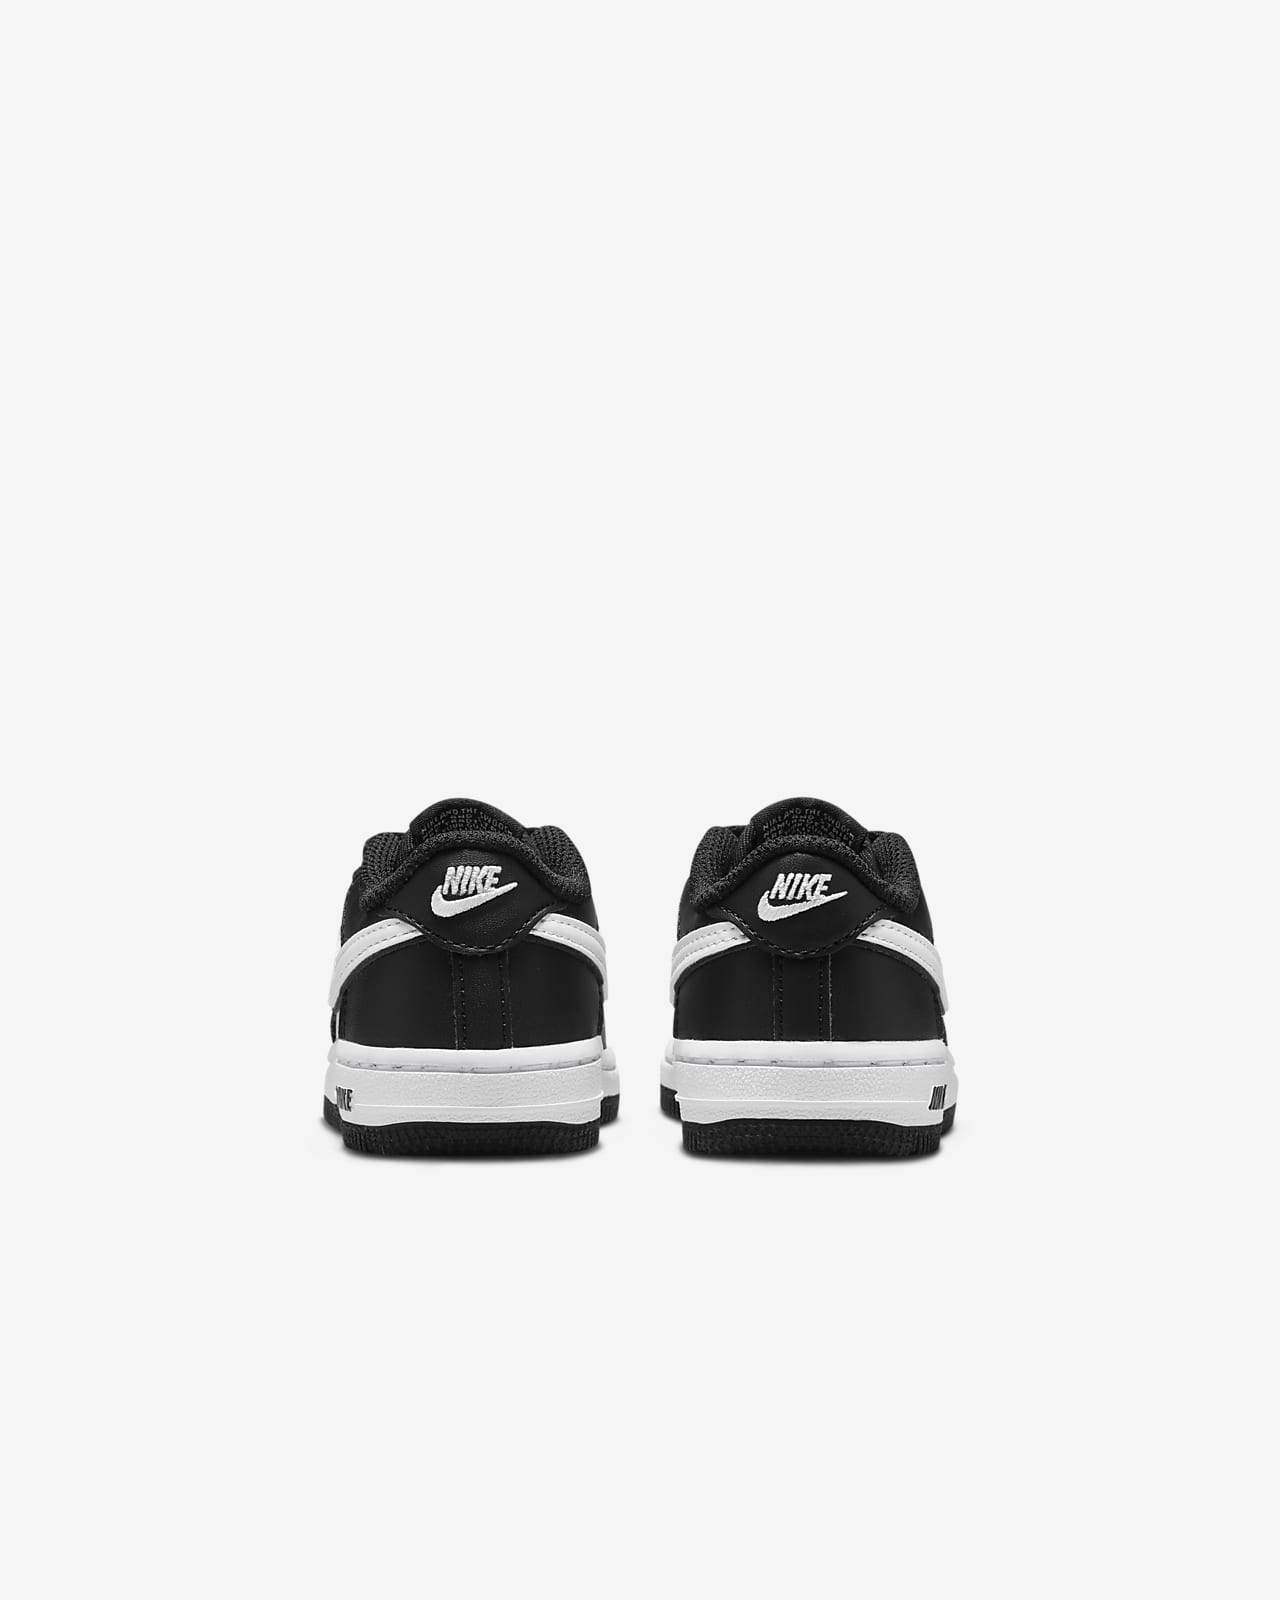 Nike Air Force 1 LV8 2 (GS), black and white